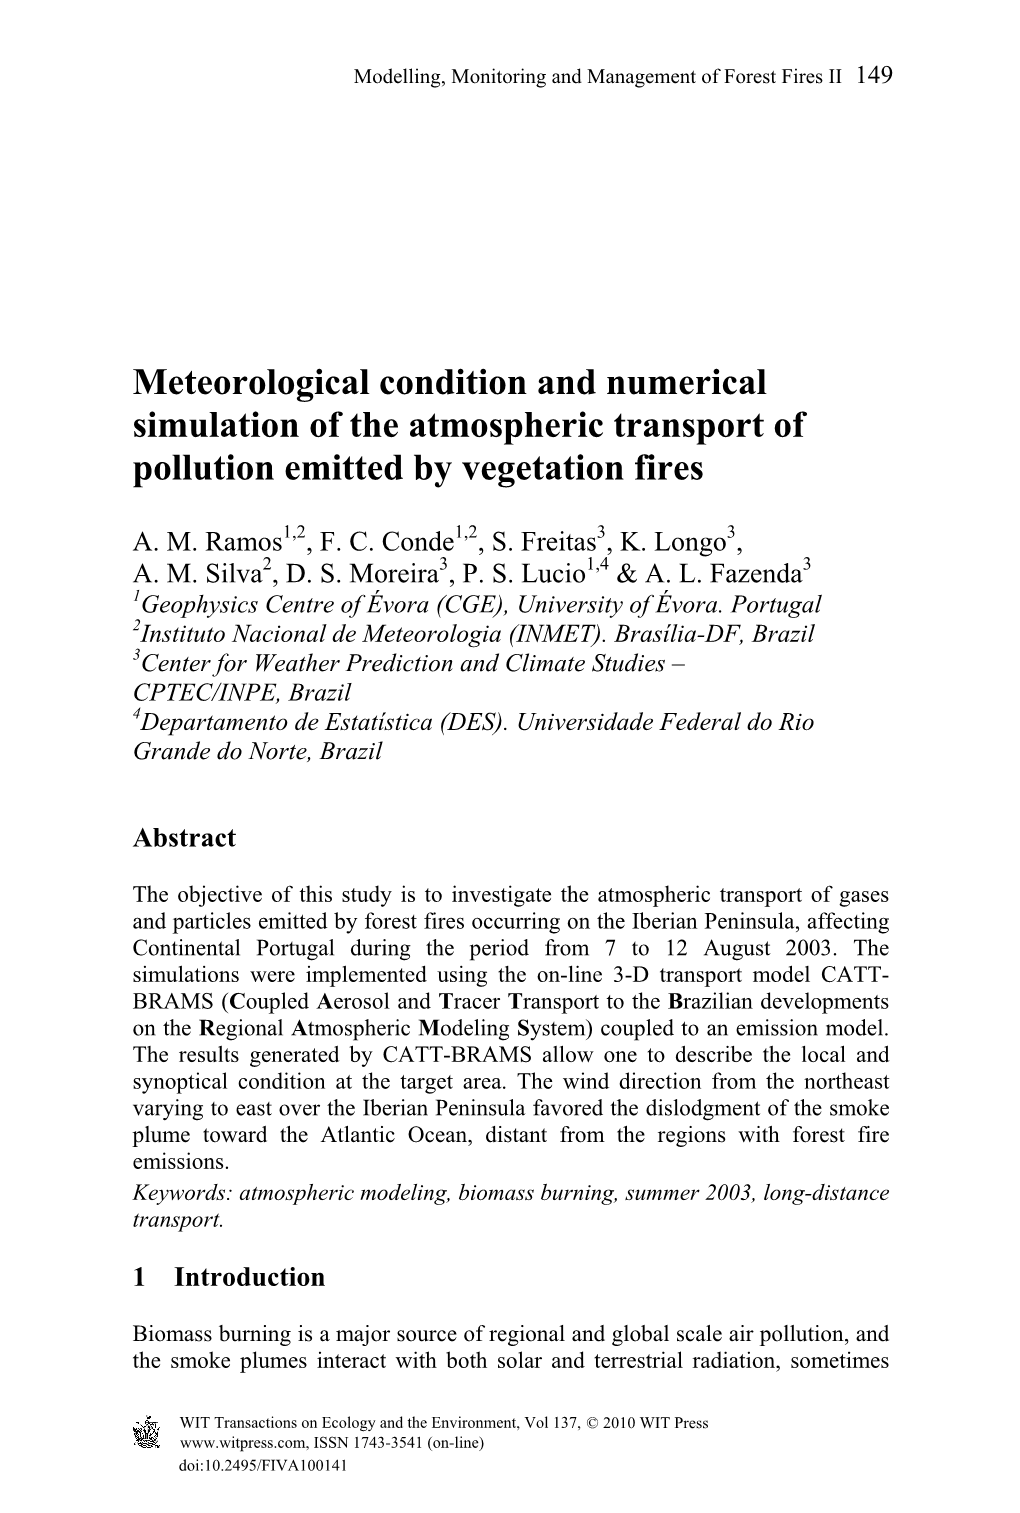 Meteorological Condition and Numerical Simulation of the Atmospheric Transport of Pollution Emitted by Vegetation Fires